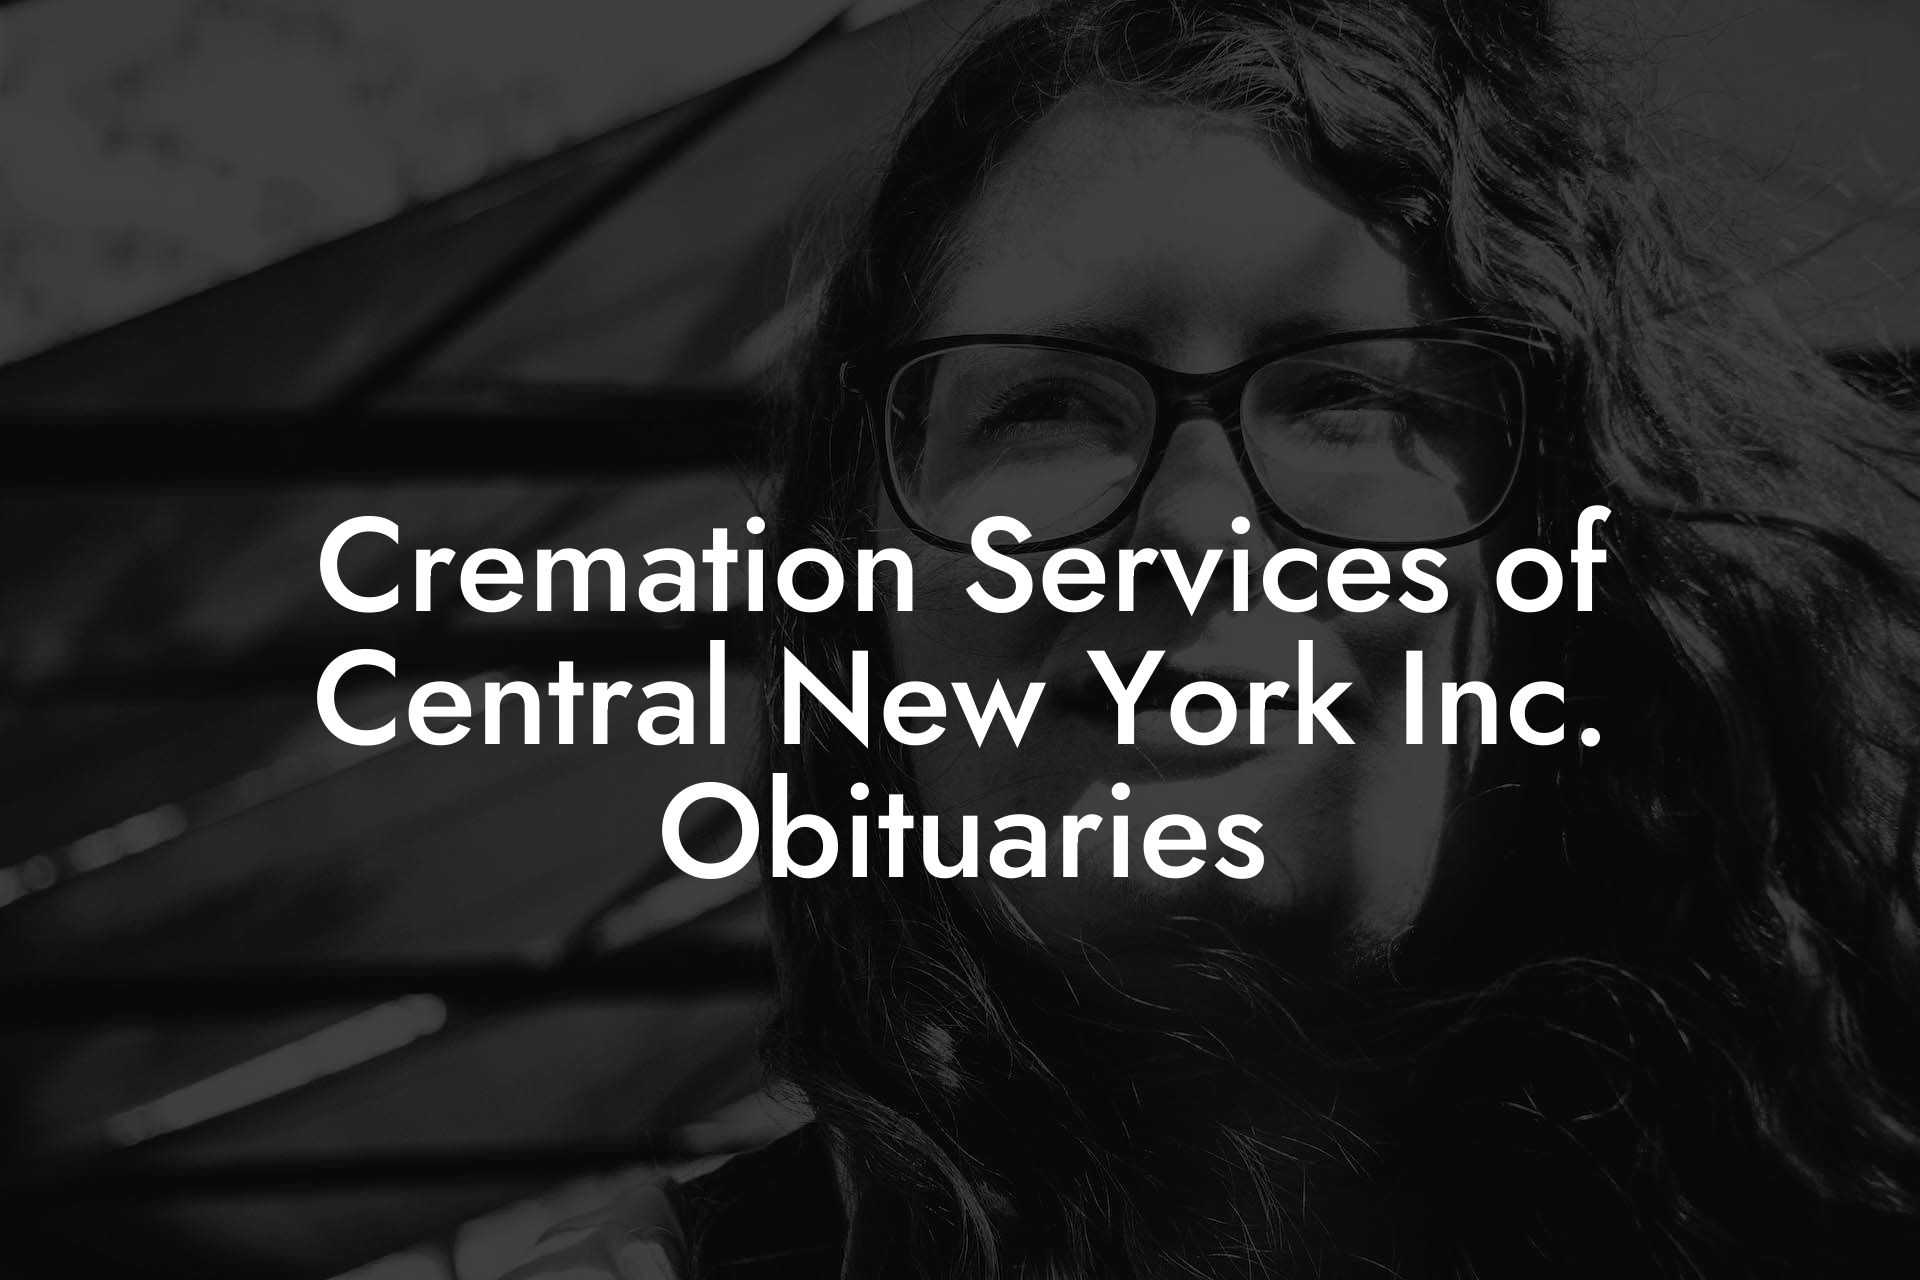 Cremation Services of Central New York Inc. Obituaries